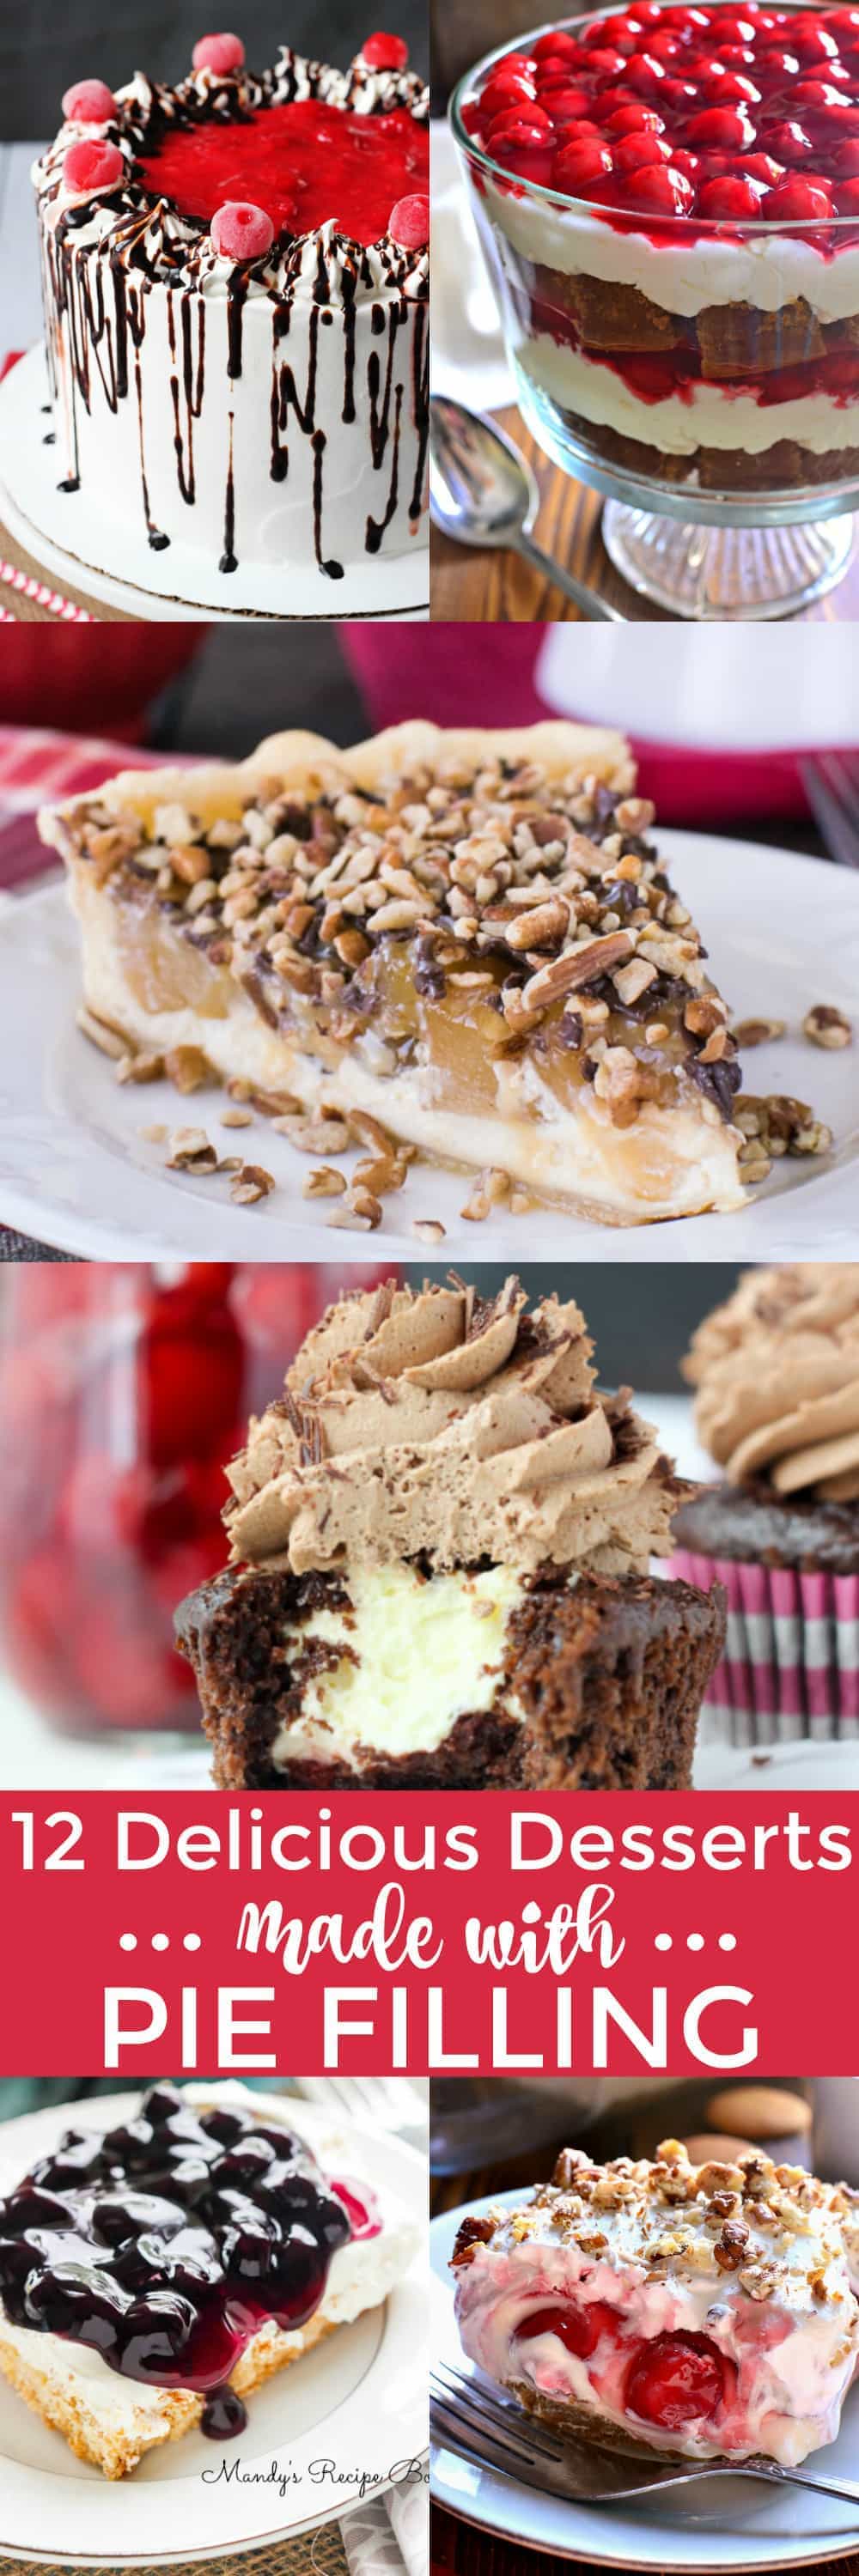 12 Delicious Desserts to help get you ready for the holidays! These treats are perfect for all your holiday gatherings, and they're all made with pie filling! Which means they not only taste great, but they're easy to whip up during the busiest time of year.